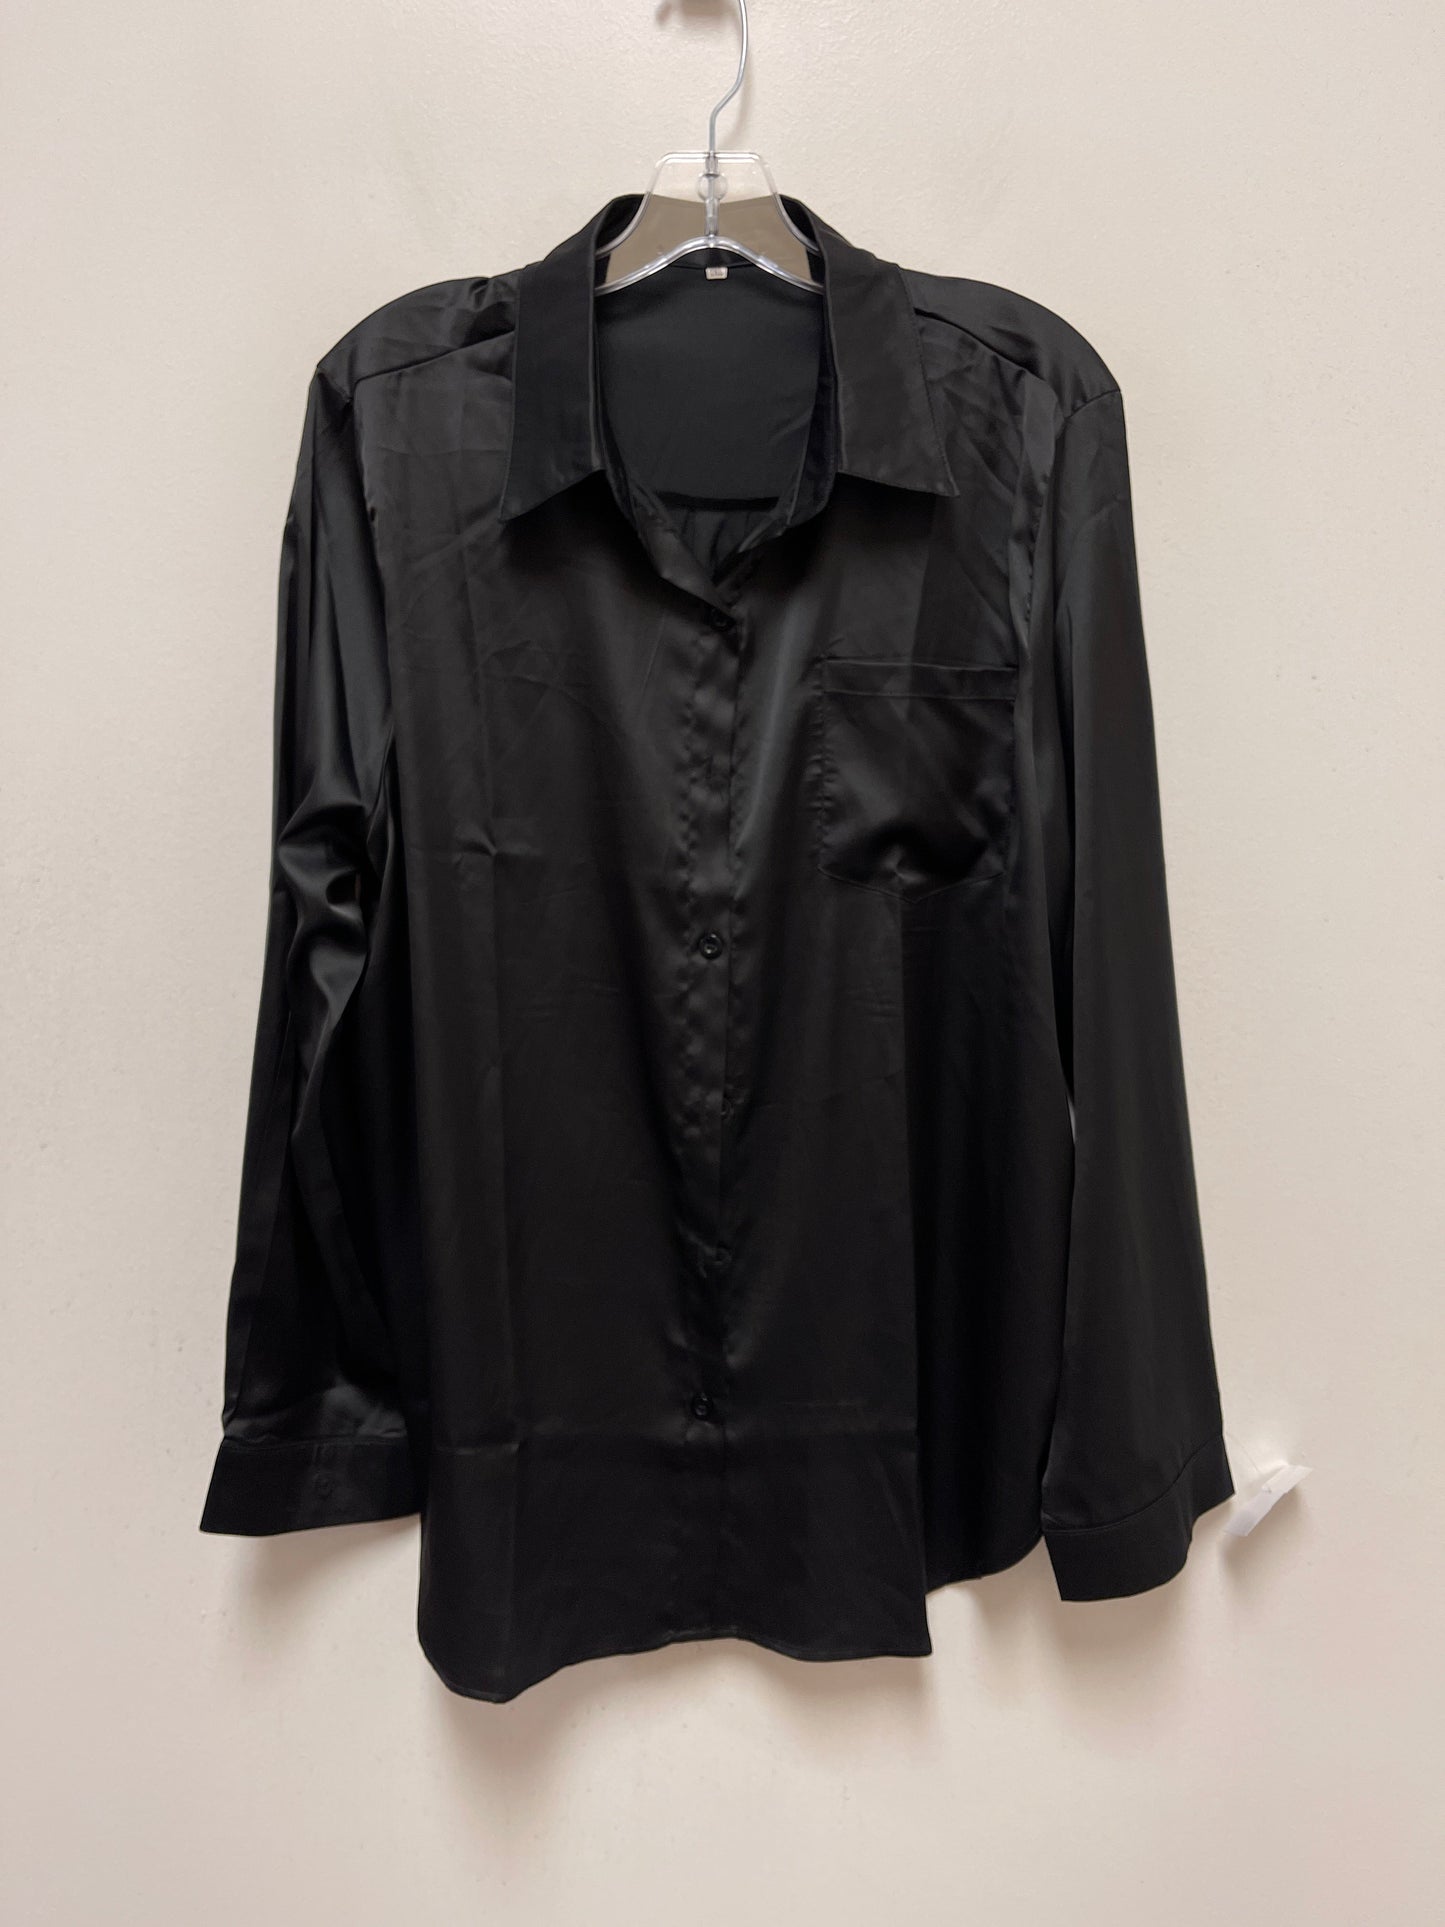 Black Blouse Long Sleeve Clothes Mentor, Size 2x